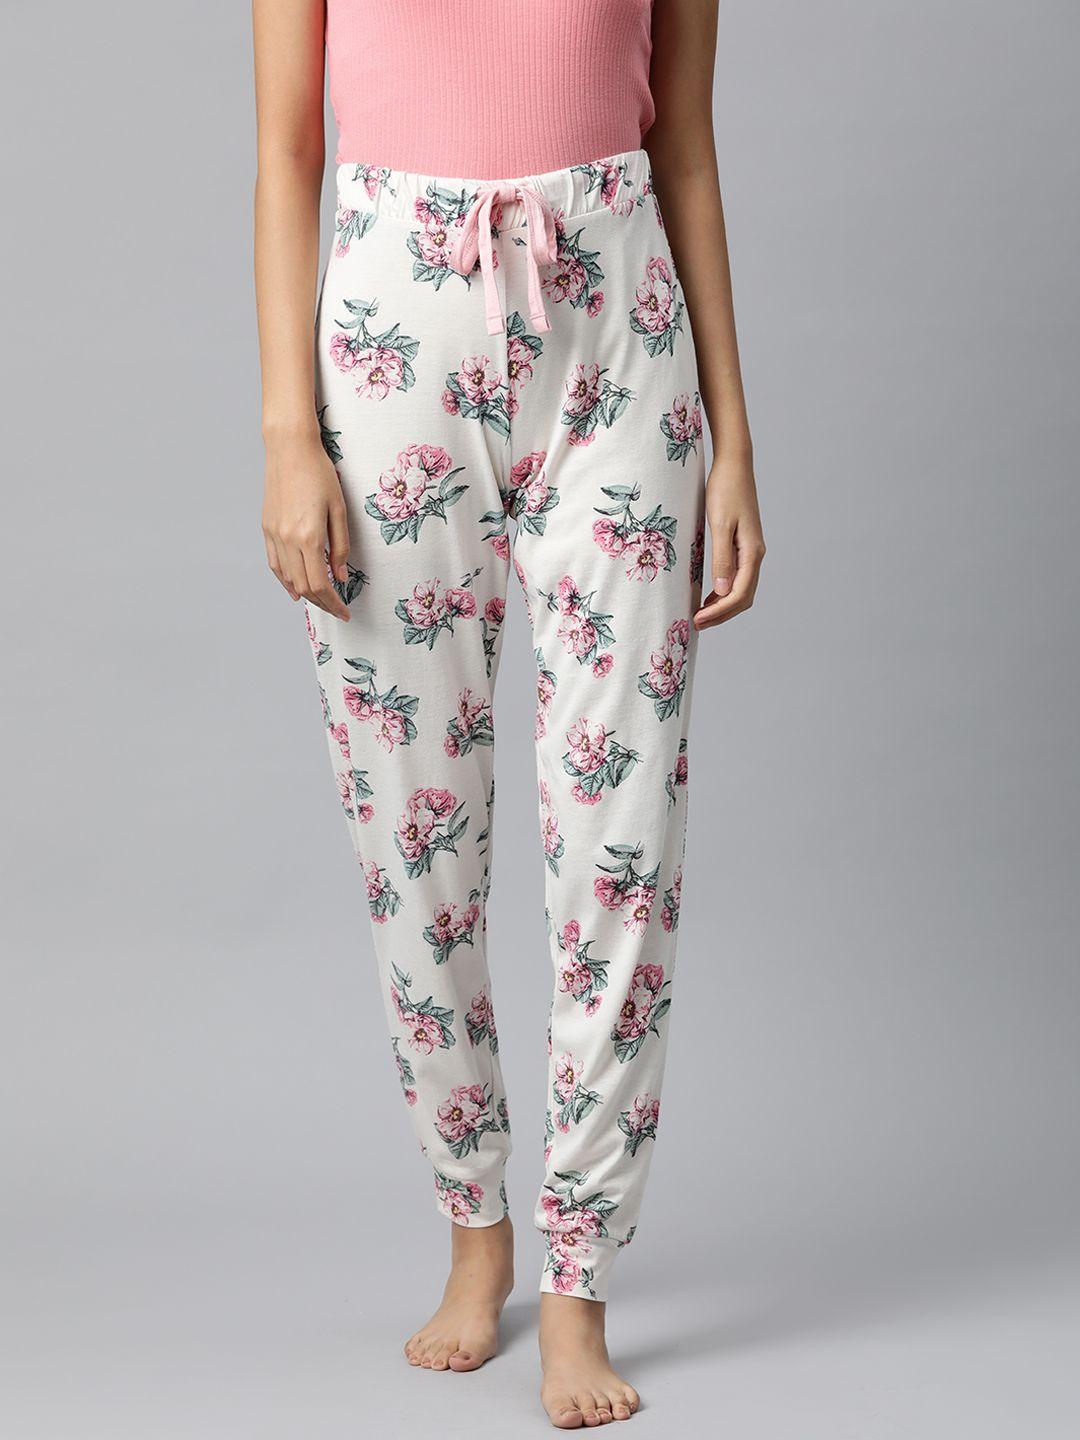 marks & spencer women off-white & pink floral print joggers